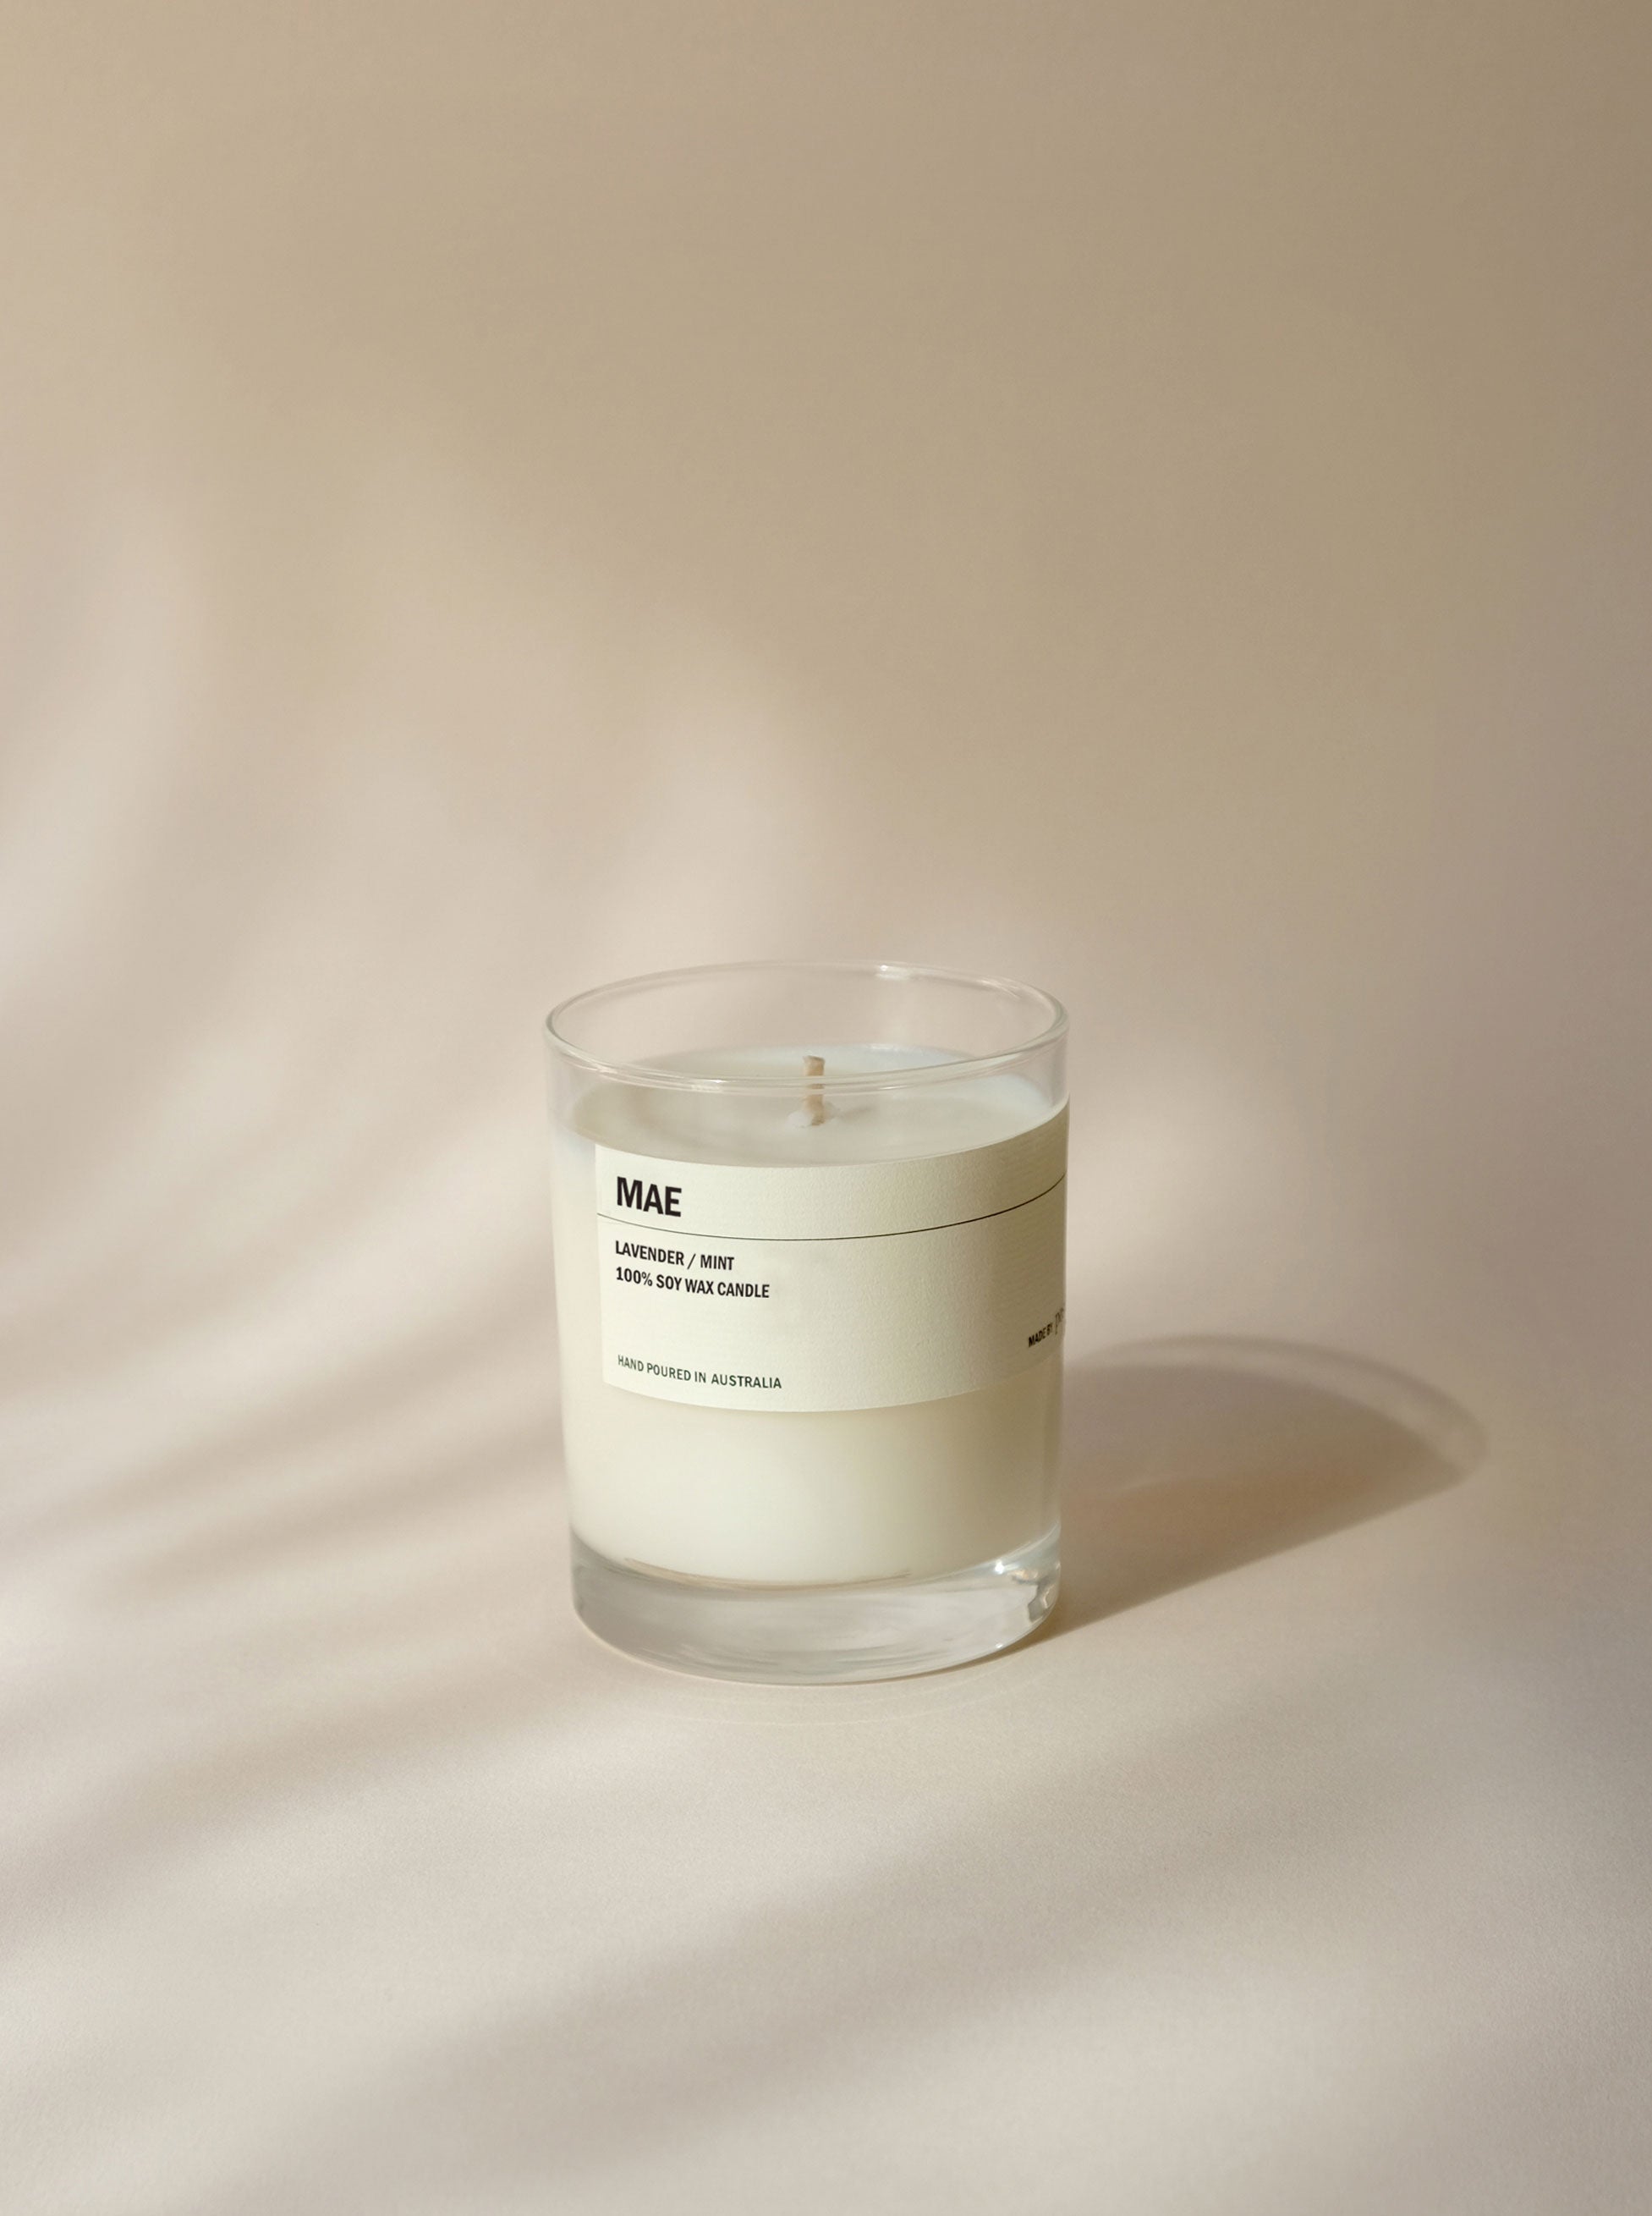 Posie MAE: Lavender / Mint Candle 300g